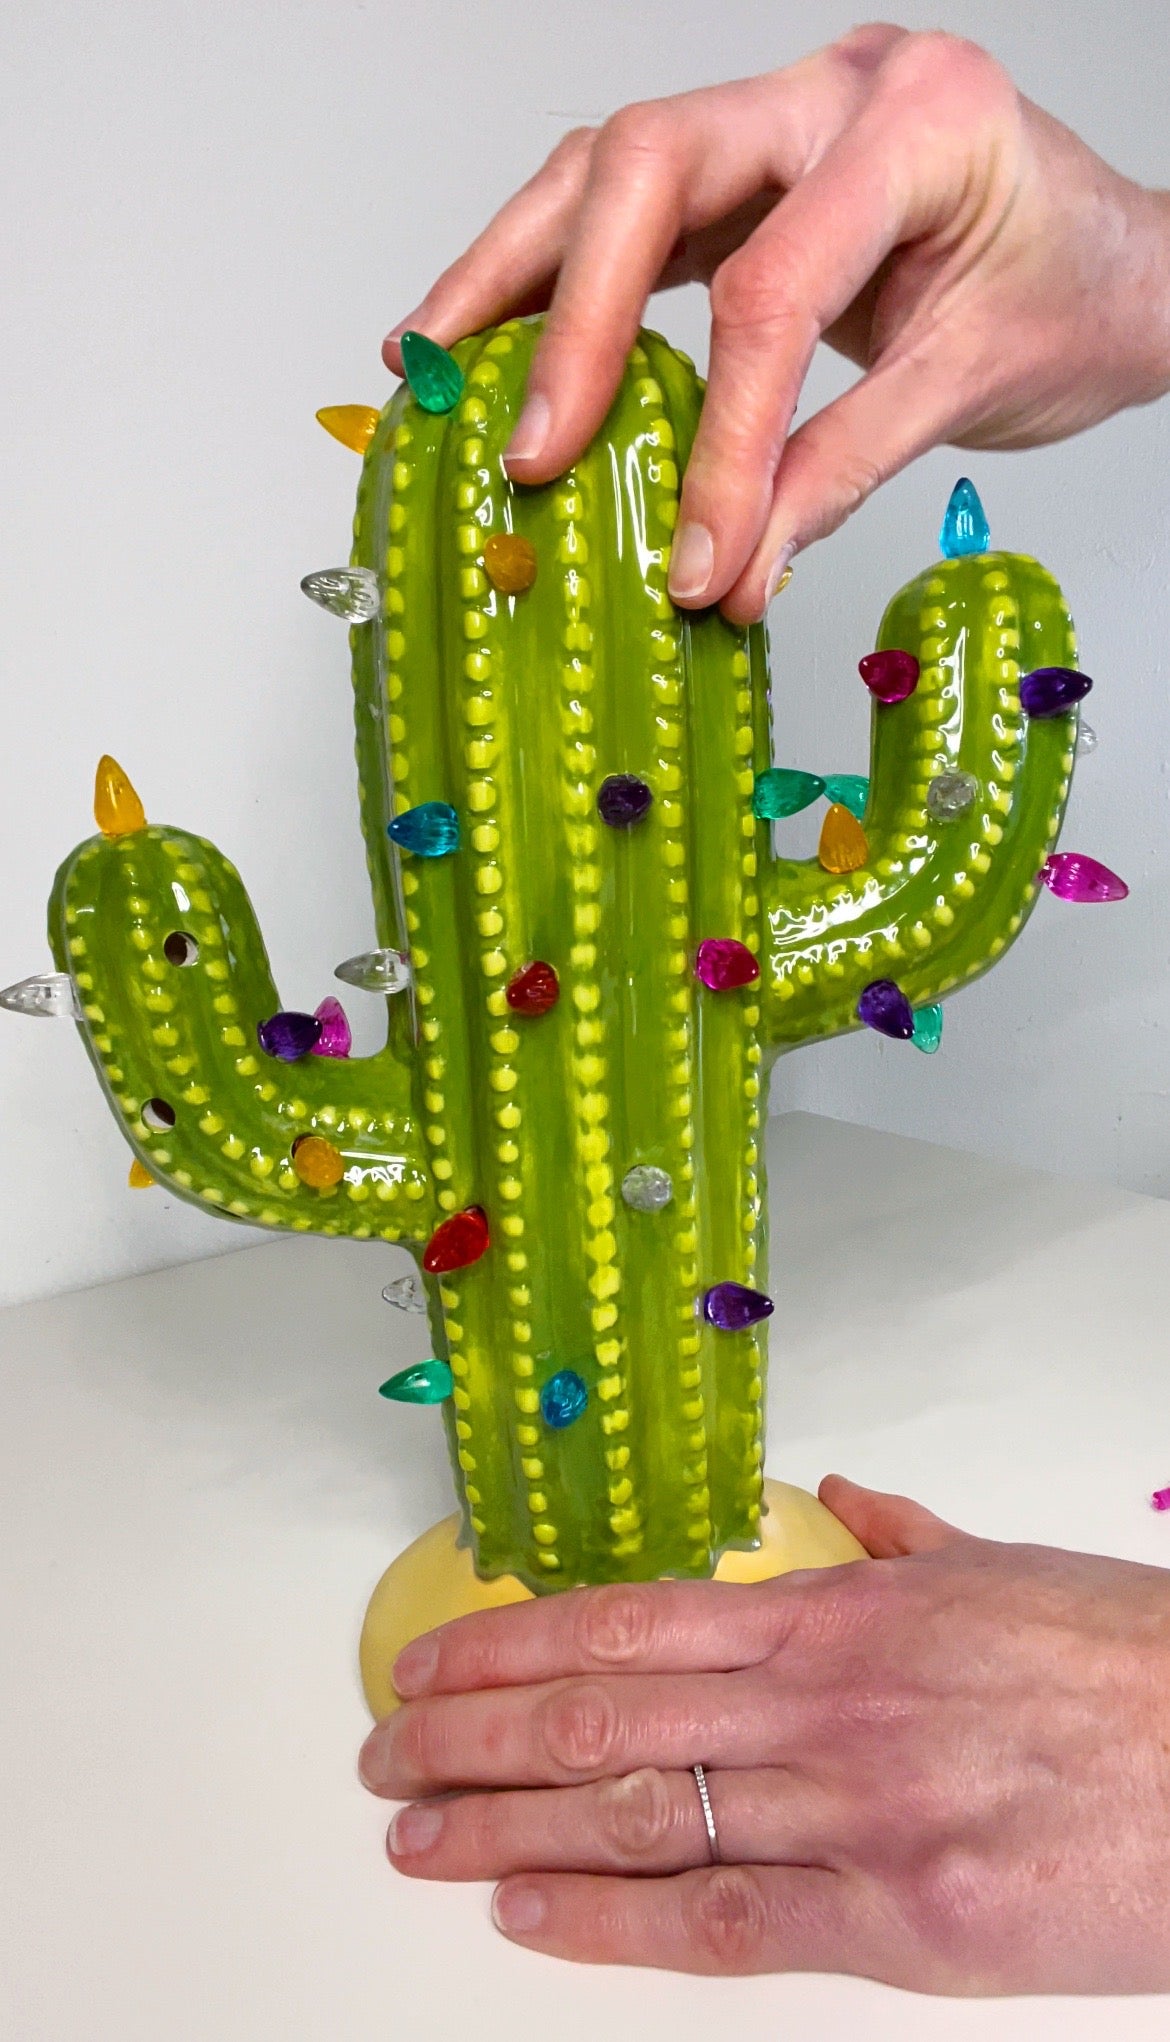 Removing bulbs from ceramic cactus